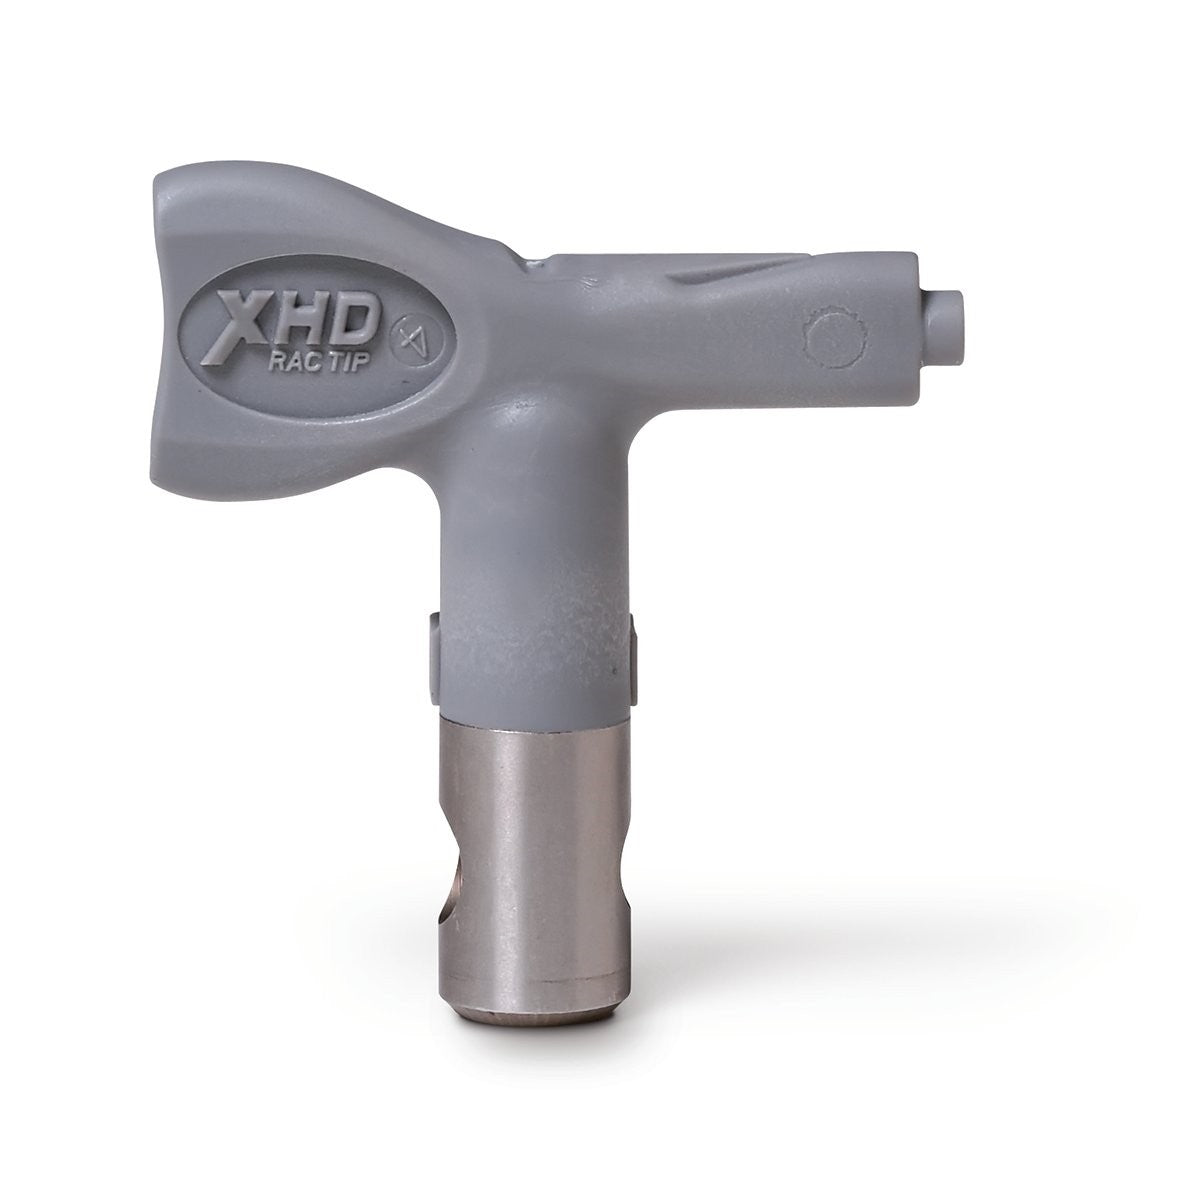 Rac XHD SwitchTip (Large 14-20") - PURspray